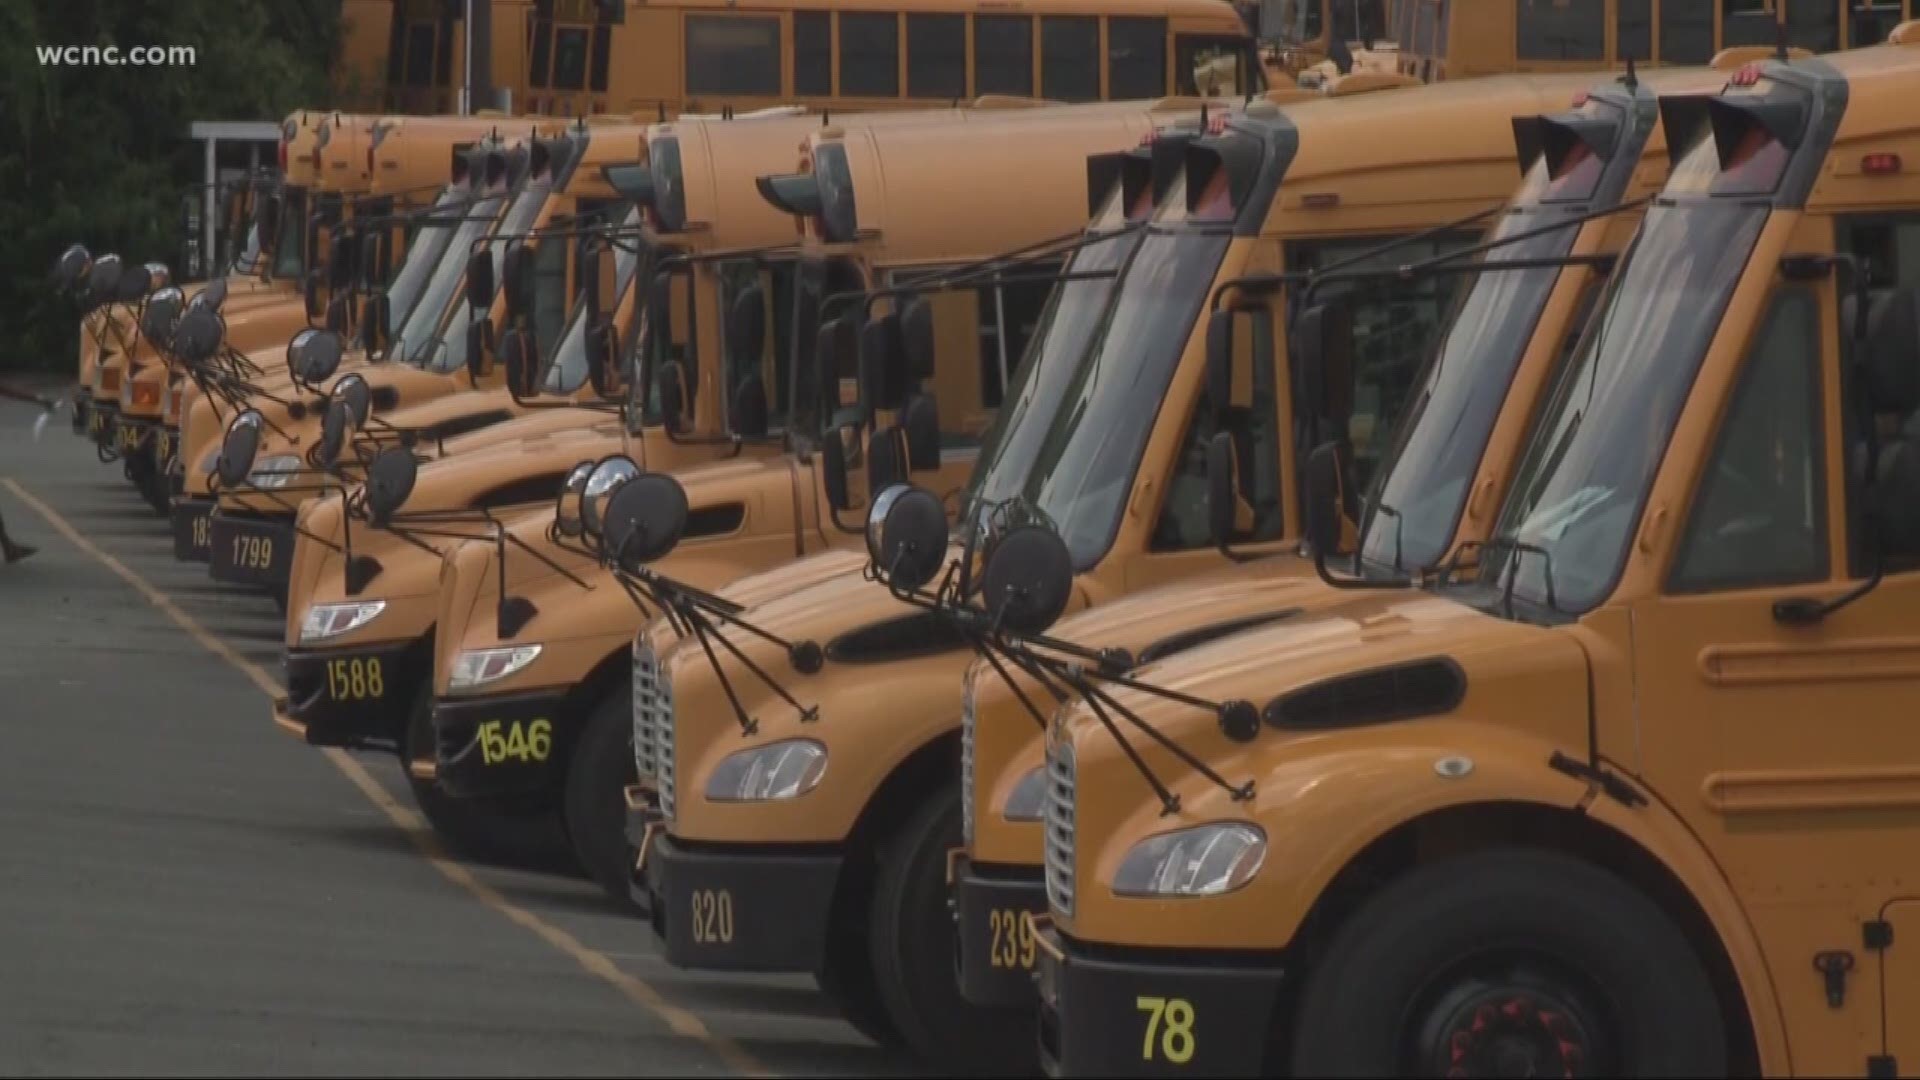 The Stanly County School District is facing a major shortage of bus drivers, leaving officials to consider staggered start times to help students get to school on time.